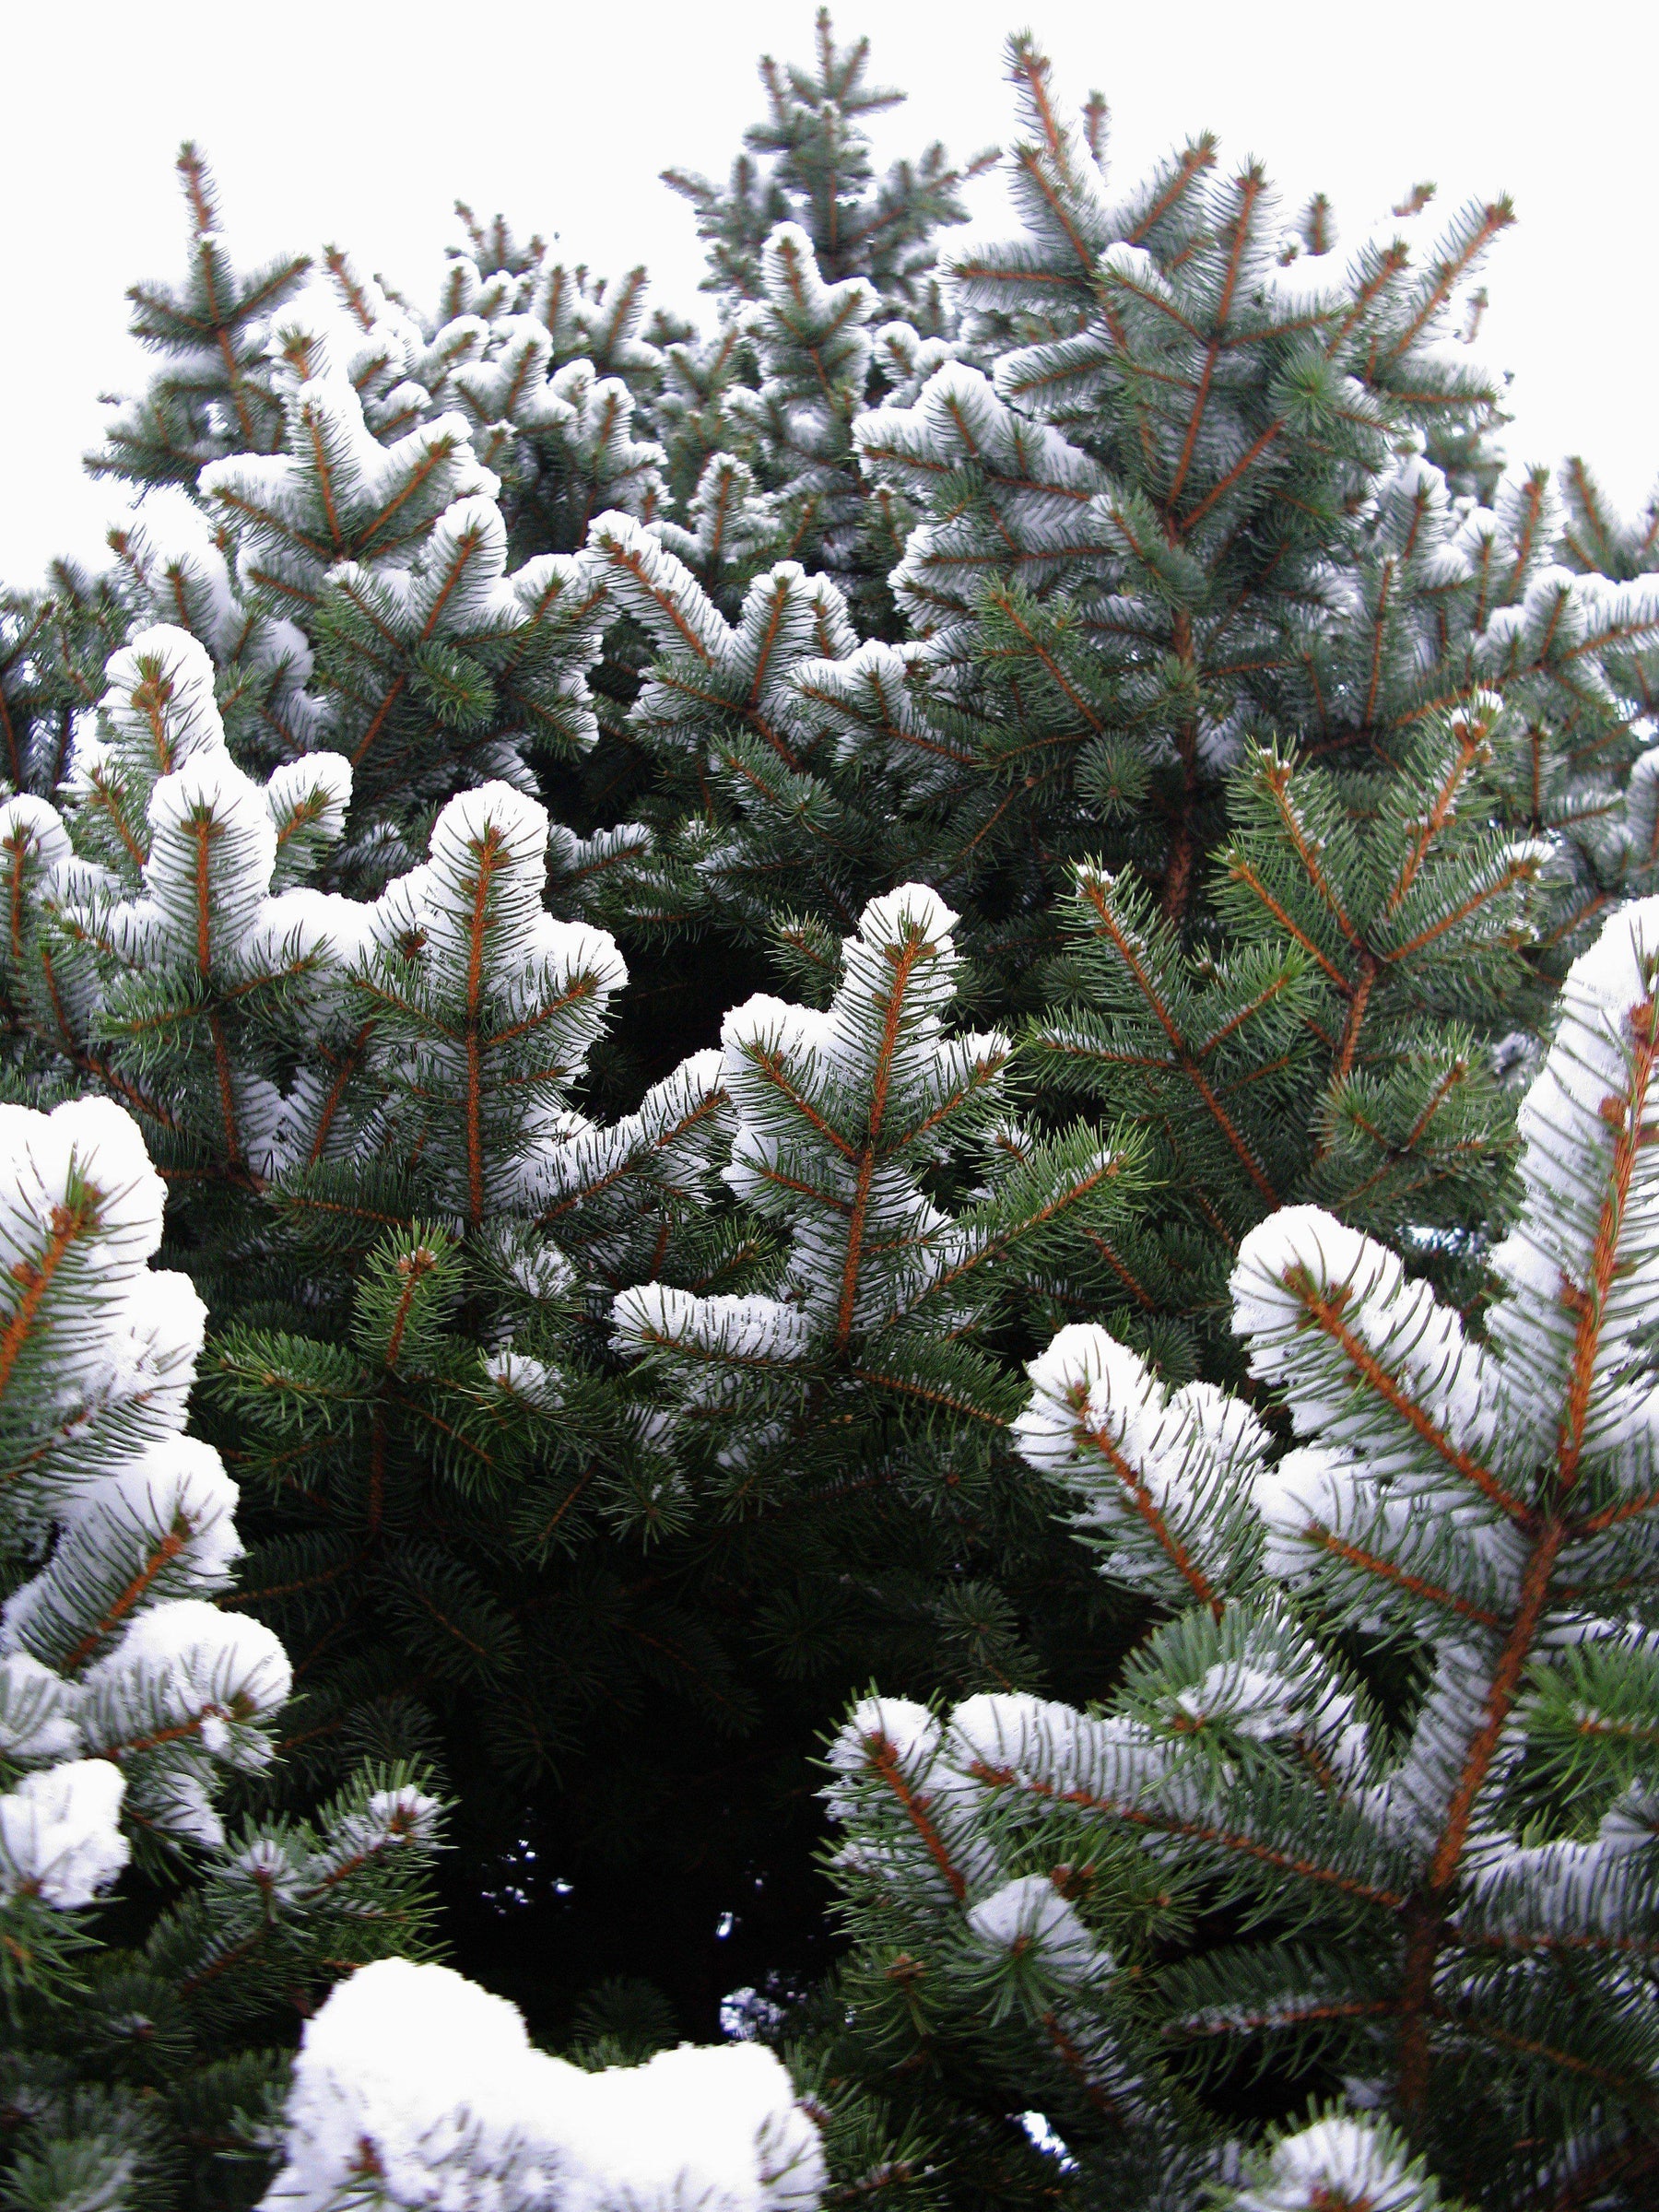 How To Care For Your Blue Spruce Bonsai Tree